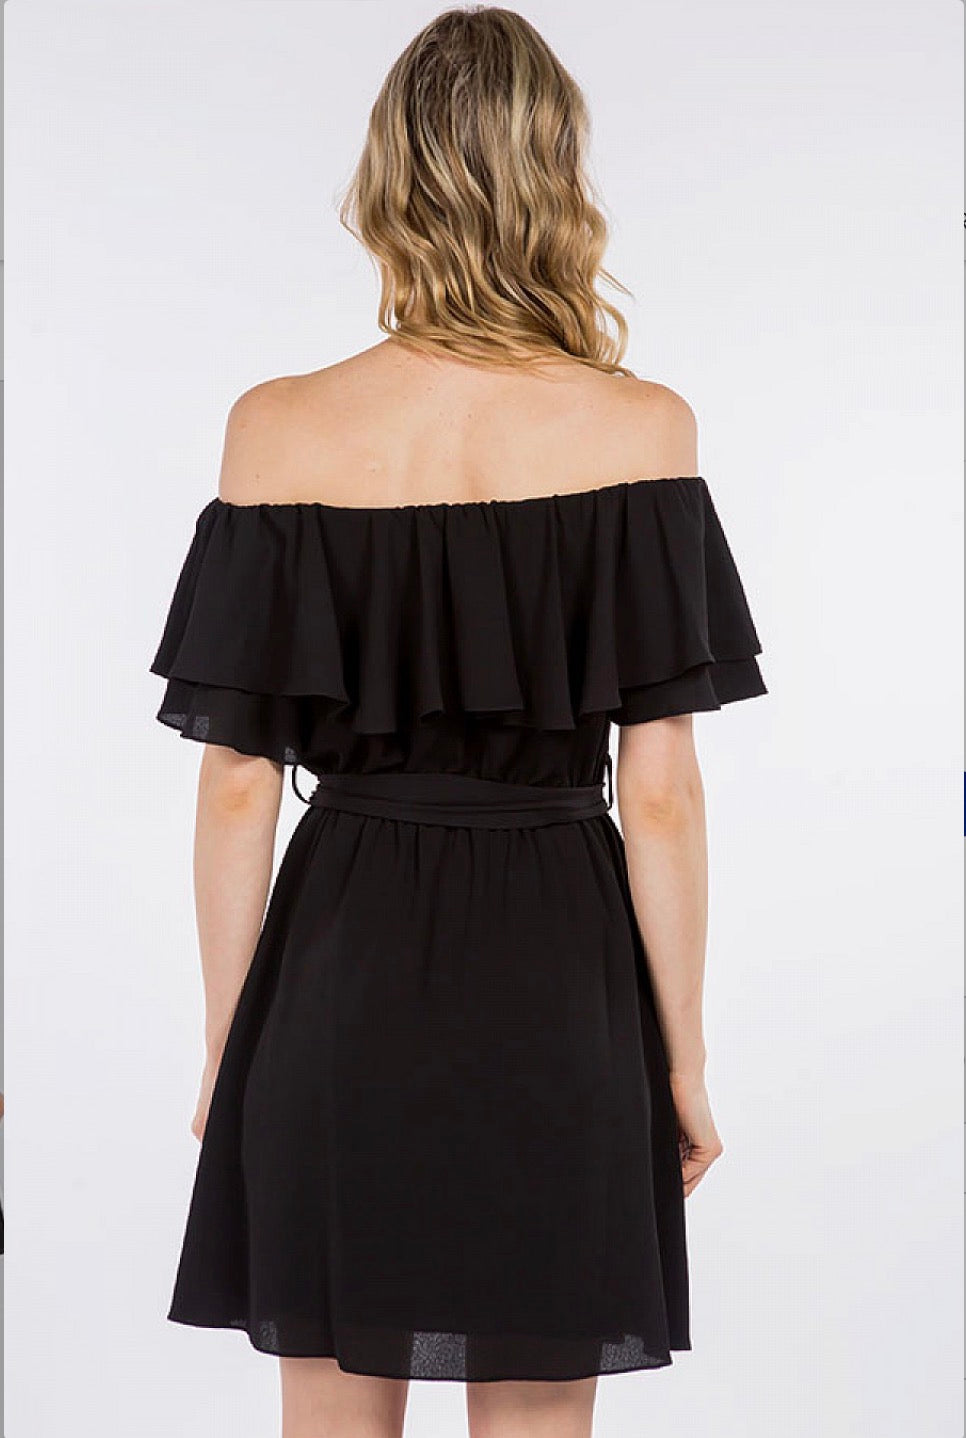 A woman wearing a black Off Shoulder Ruffle Dress by Spin USA.